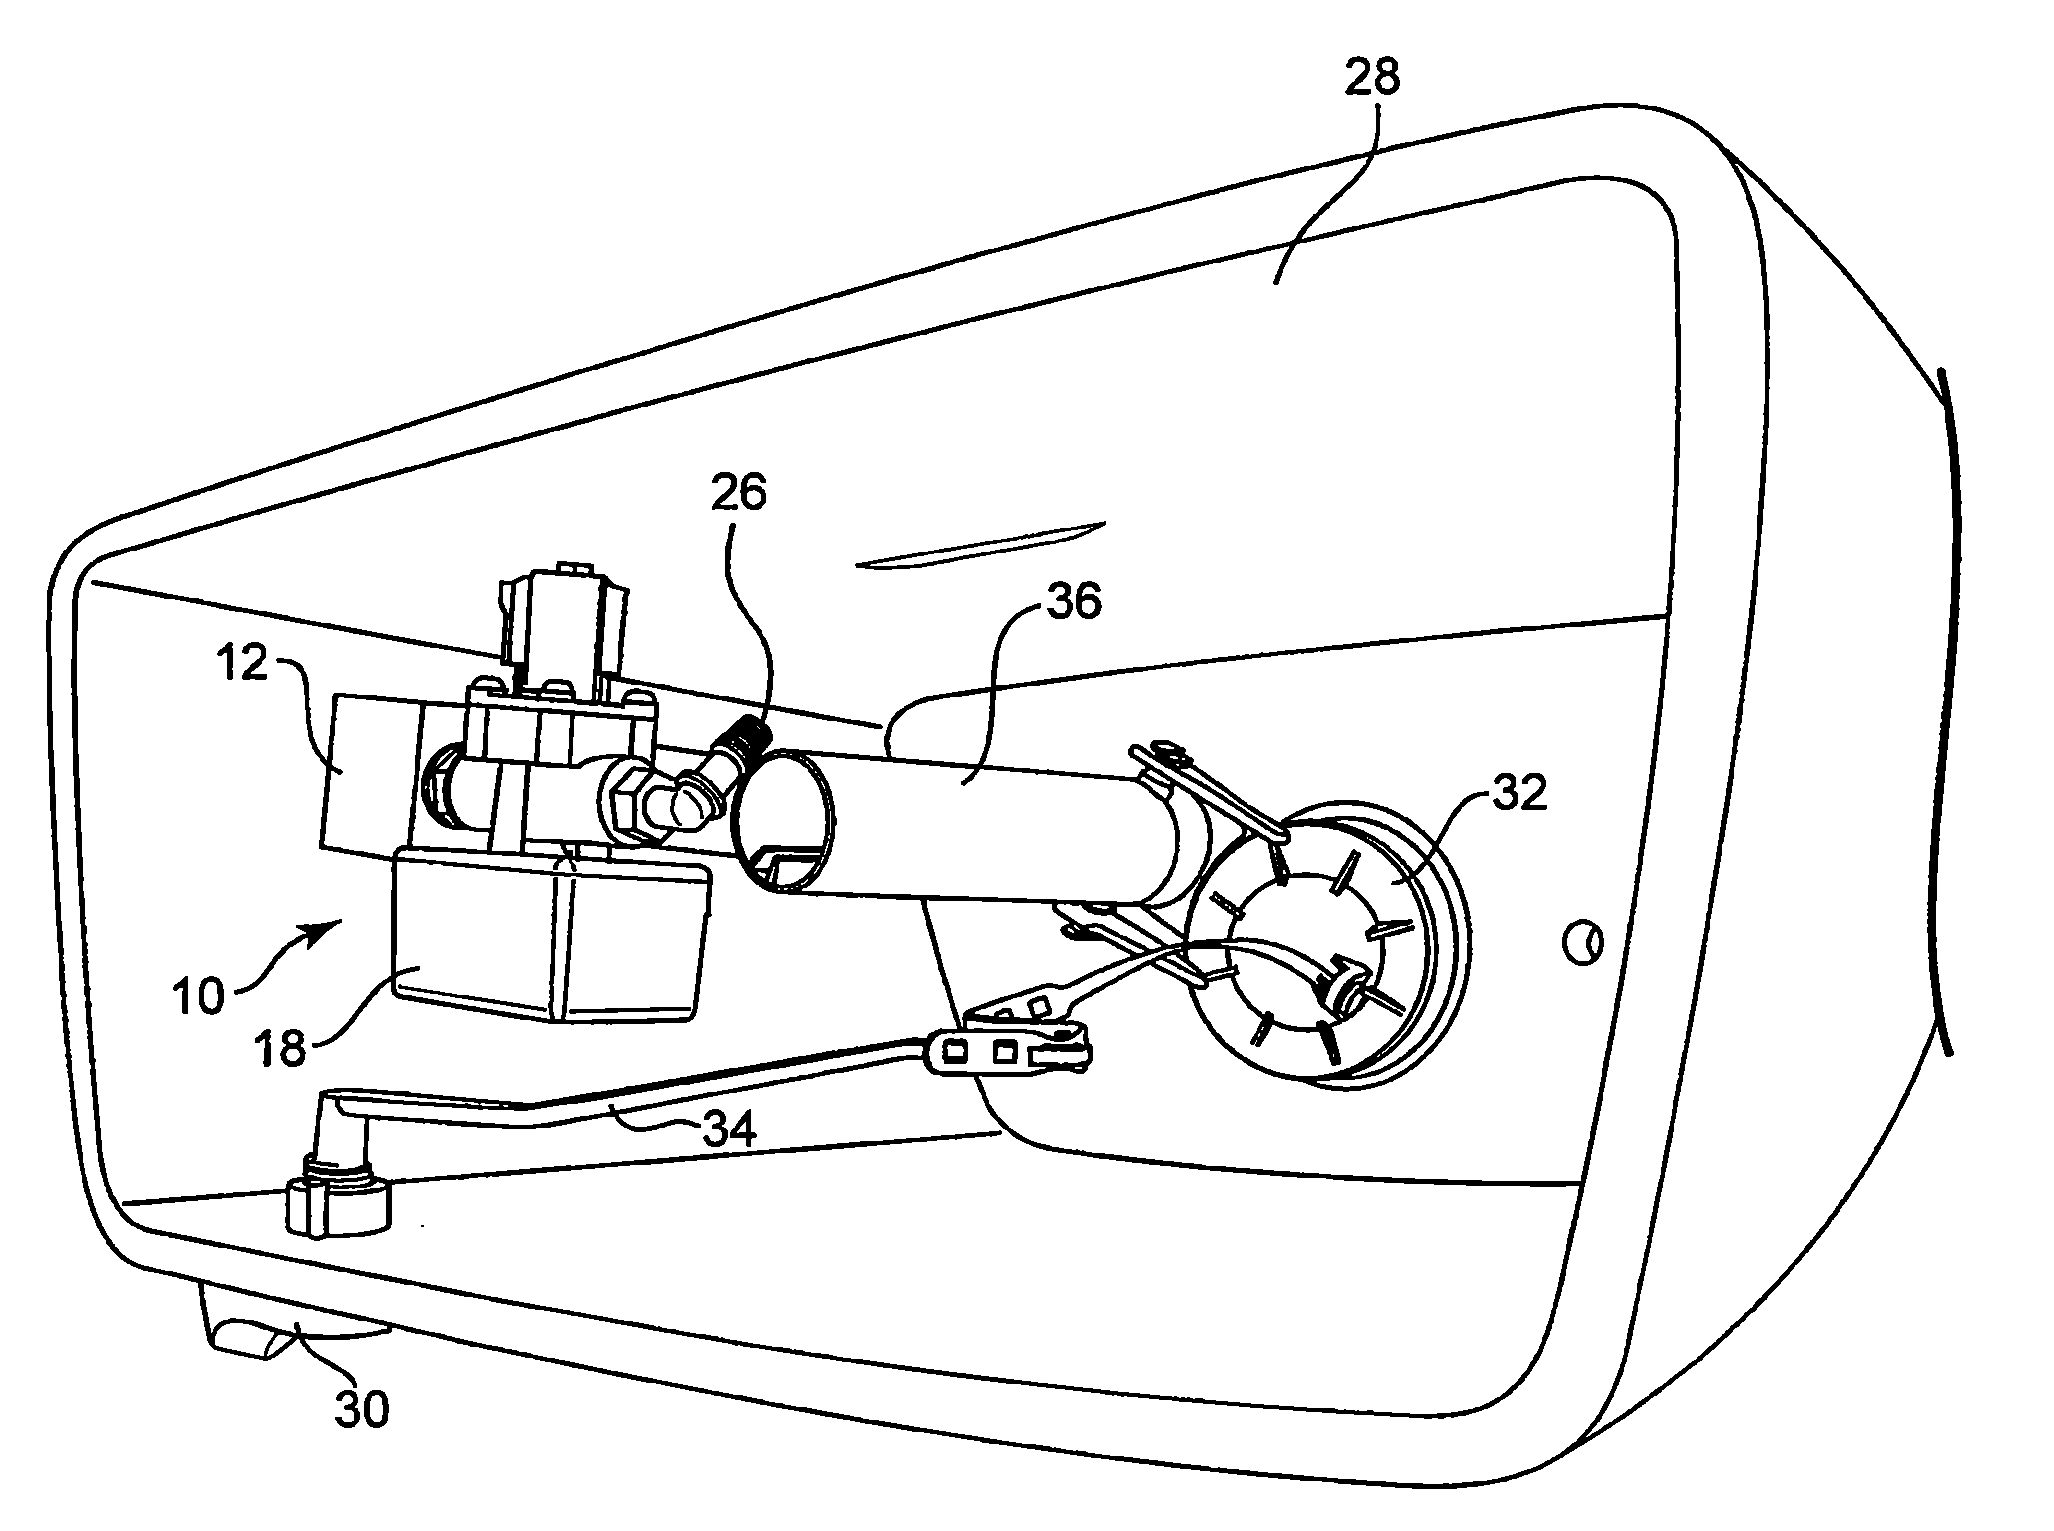 Electronic toilet tank monitor utilizing a bistable latching solenoid control circuit